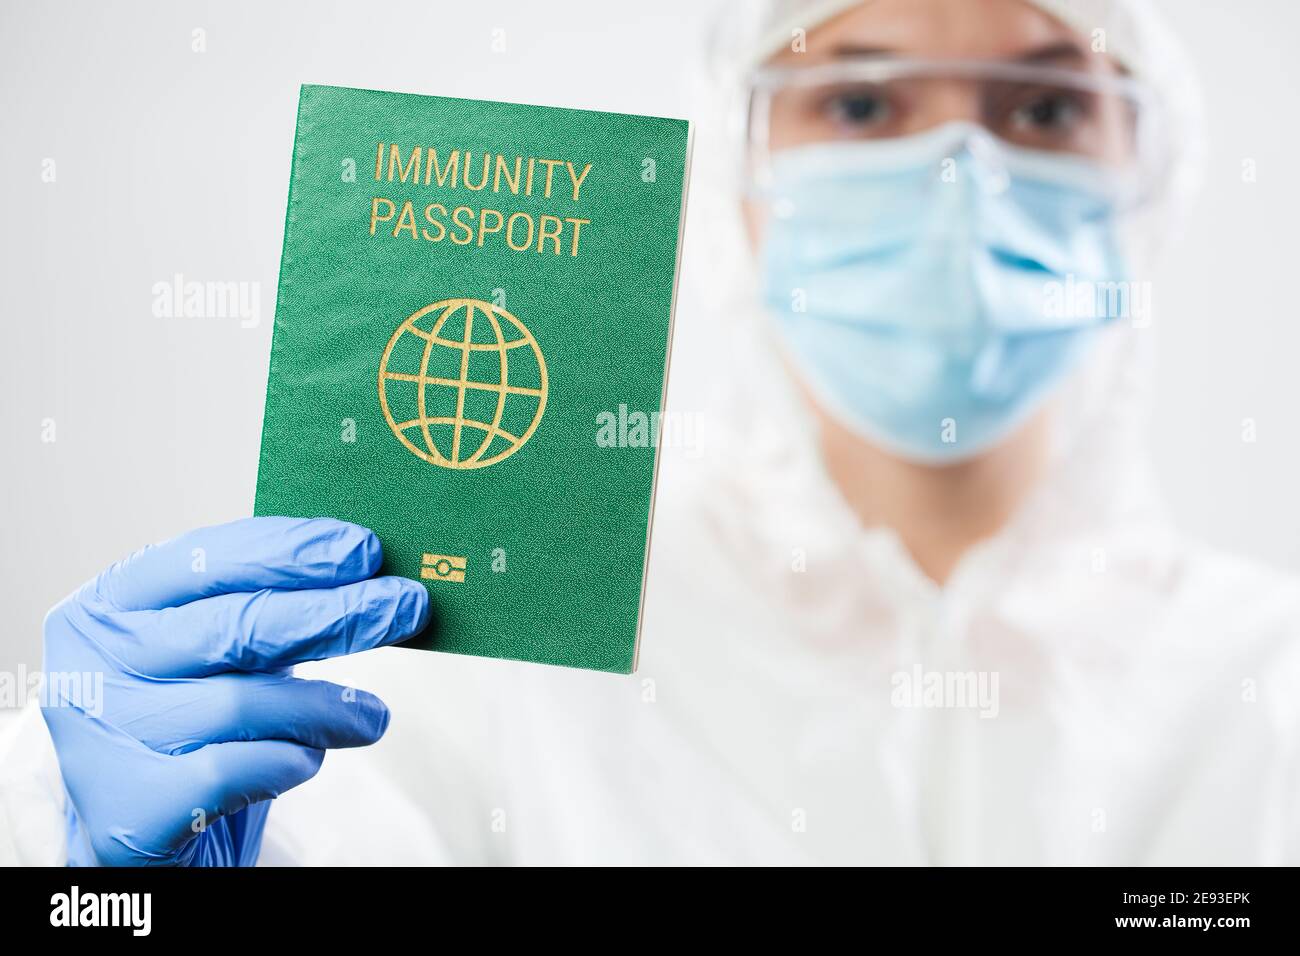 Medical US healthcare security officer worker in personal protective equipment holding green immunity passport ID card,risk free certificate document Stock Photo